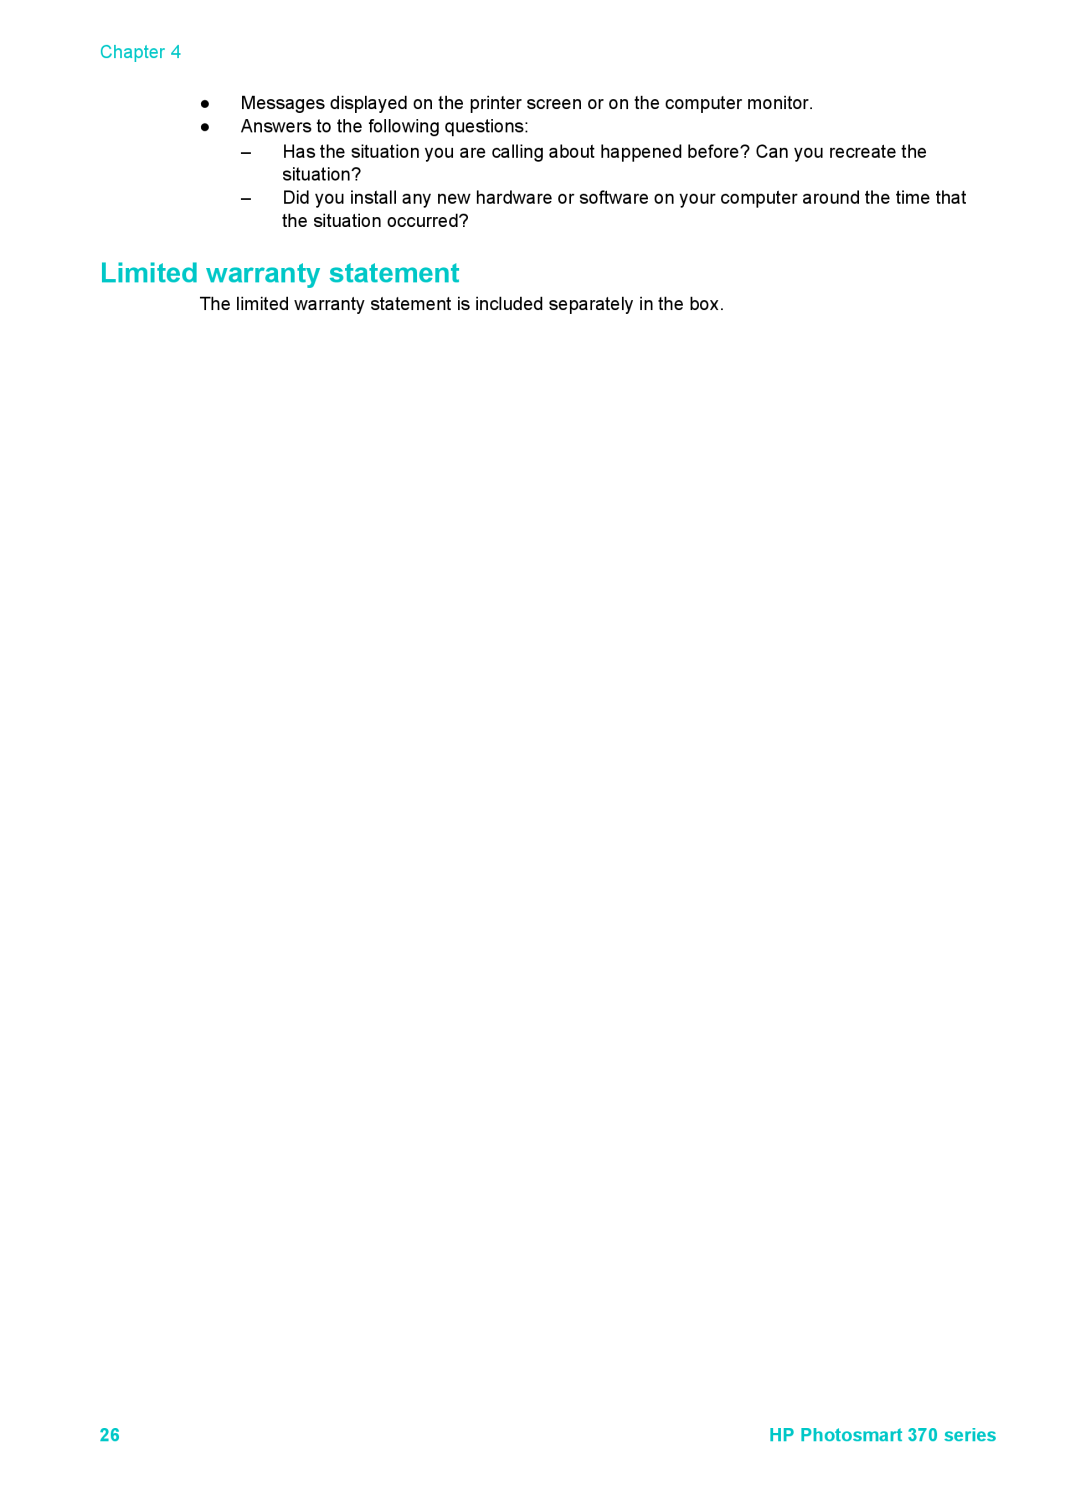 Olympus 370 series manual Limited warranty statement, Chapter 